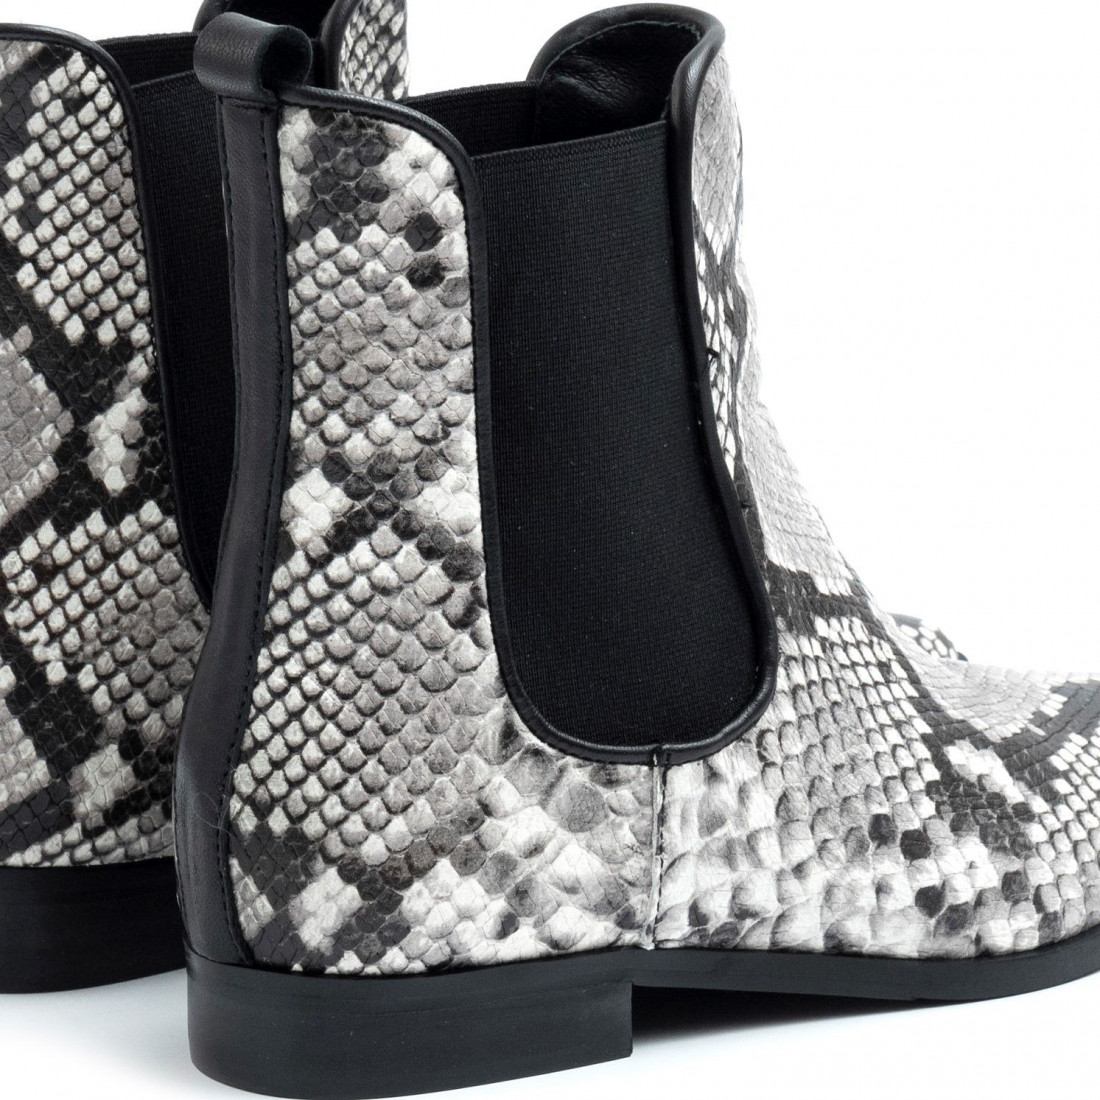 Women's Keb flat beatles booties in python-print leather